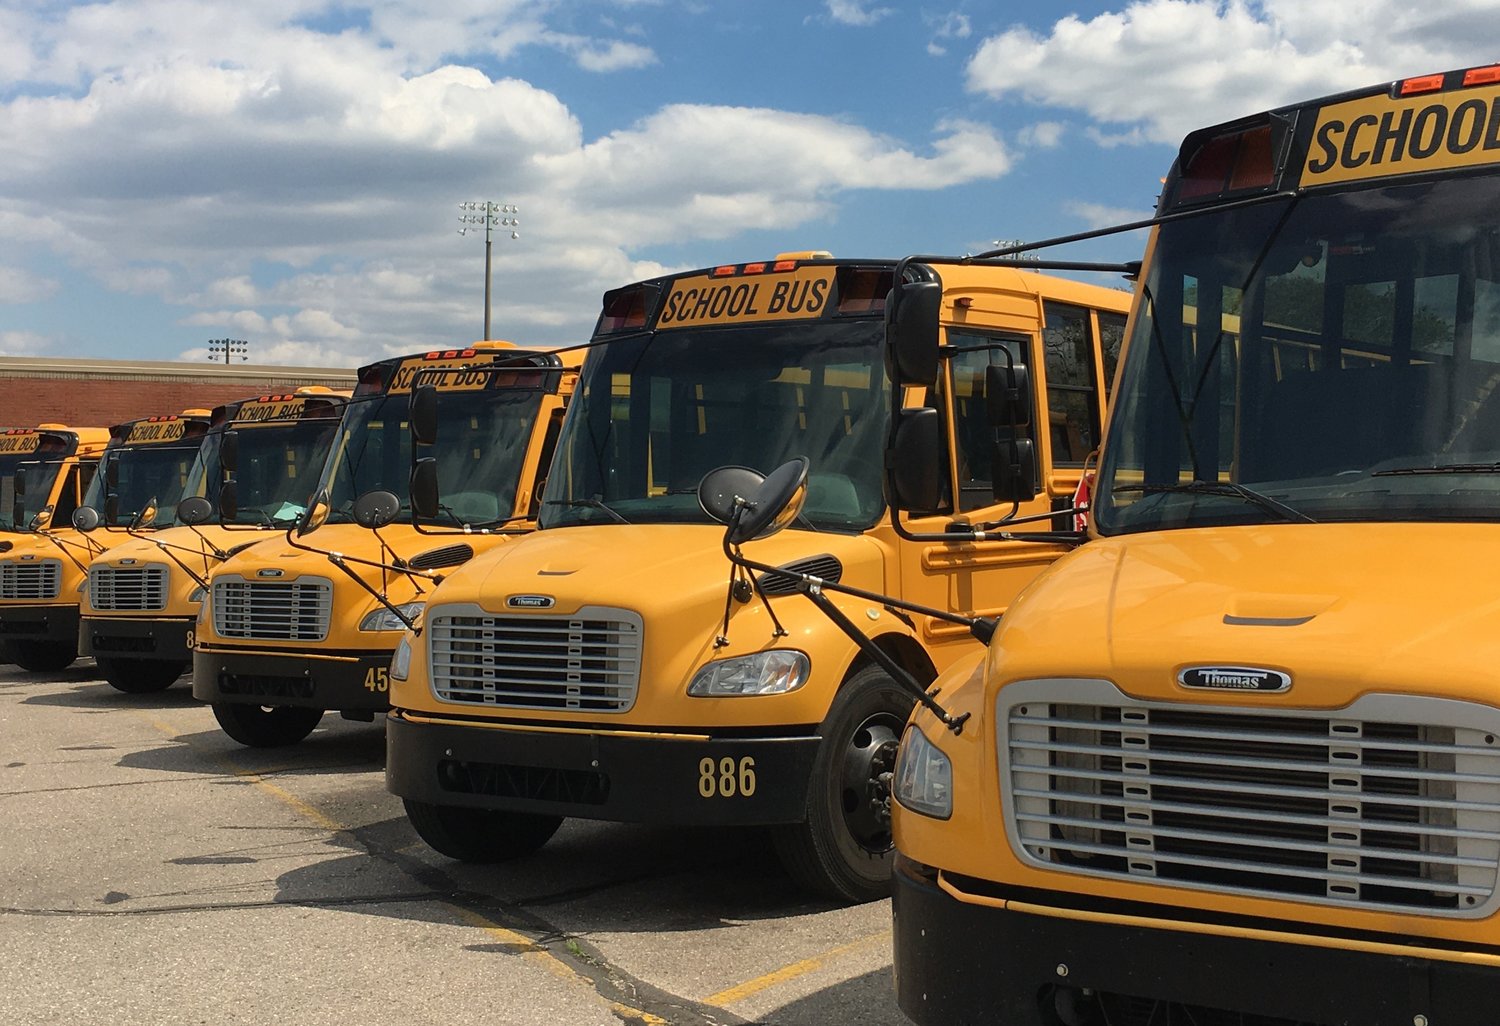 Cumberland County Schools is asking families to complete an online survey on school bus transportation needs for the 2022-23 school year.